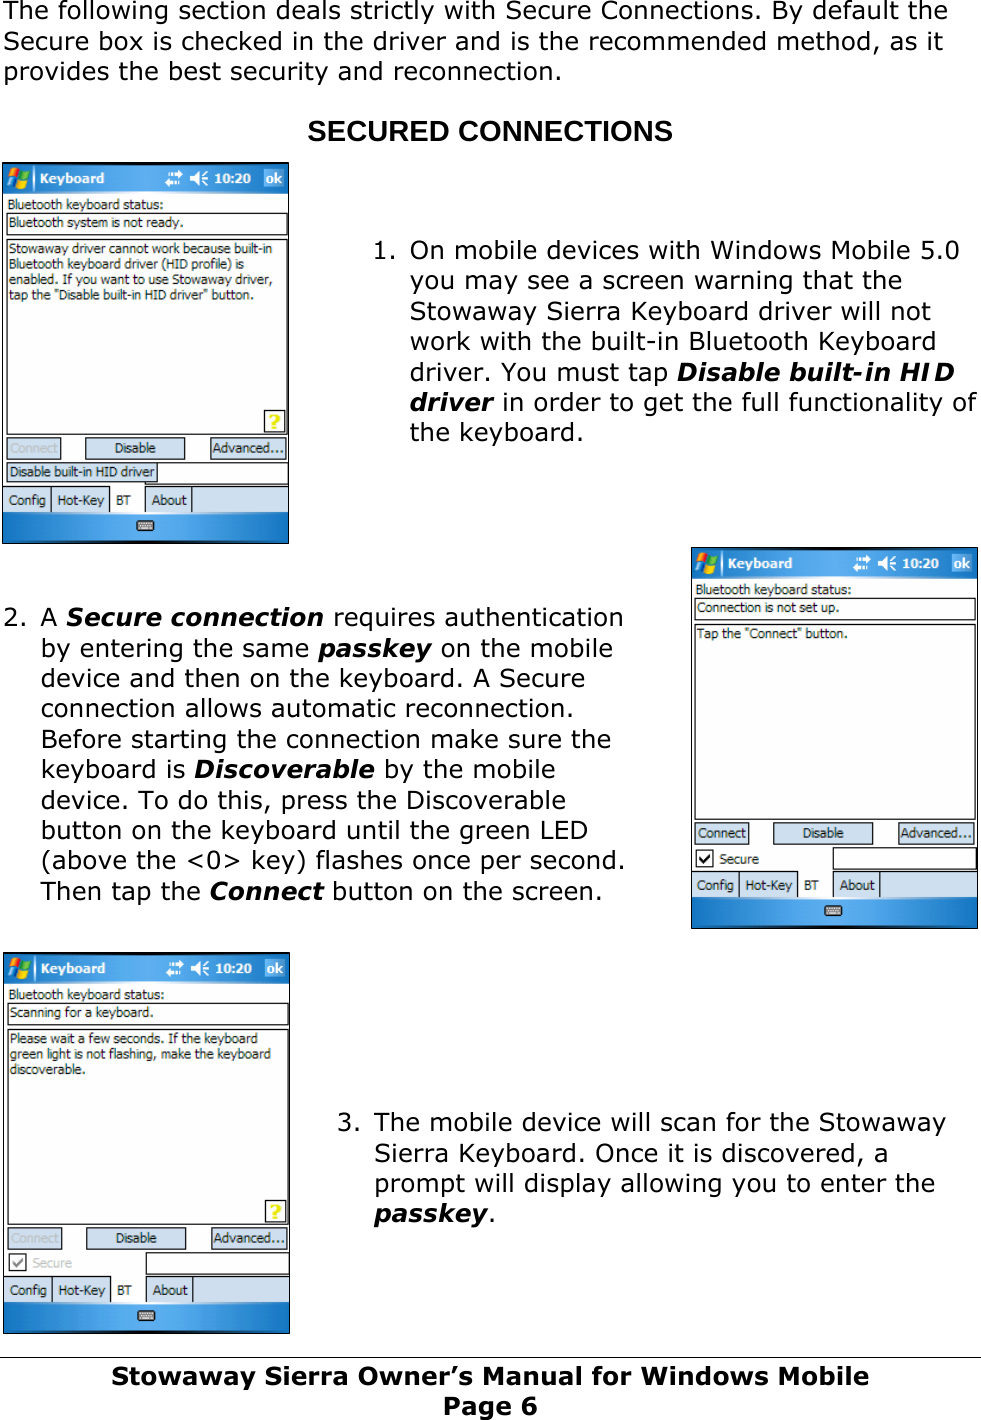  The following section deals strictly with Secure Connections. By default the Secure box is checked in the driver and is the recommended method, as it provides the best security and reconnection.  SECURED CONNECTIONS    1. On mobile devices with Windows Mobile 5.0 you may see a screen warning that the Stowaway Sierra Keyboard driver will not work with the built-in Bluetooth Keyboard driver. You must tap Disable built-in HID driver in order to get the full functionality of the keyboard.      2. A Secure connection requires authentication by entering the same passkey on the mobile device and then on the keyboard. A Secure connection allows automatic reconnection. Before starting the connection make sure the keyboard is Discoverable by the mobile device. To do this, press the Discoverable button on the keyboard until the green LED (above the &lt;0&gt; key) flashes once per second. Then tap the Connect button on the screen.        3. The mobile device will scan for the Stowaway Sierra Keyboard. Once it is discovered, a prompt will display allowing you to enter the passkey.     Stowaway Sierra Owner’s Manual for Windows Mobile Page 6 